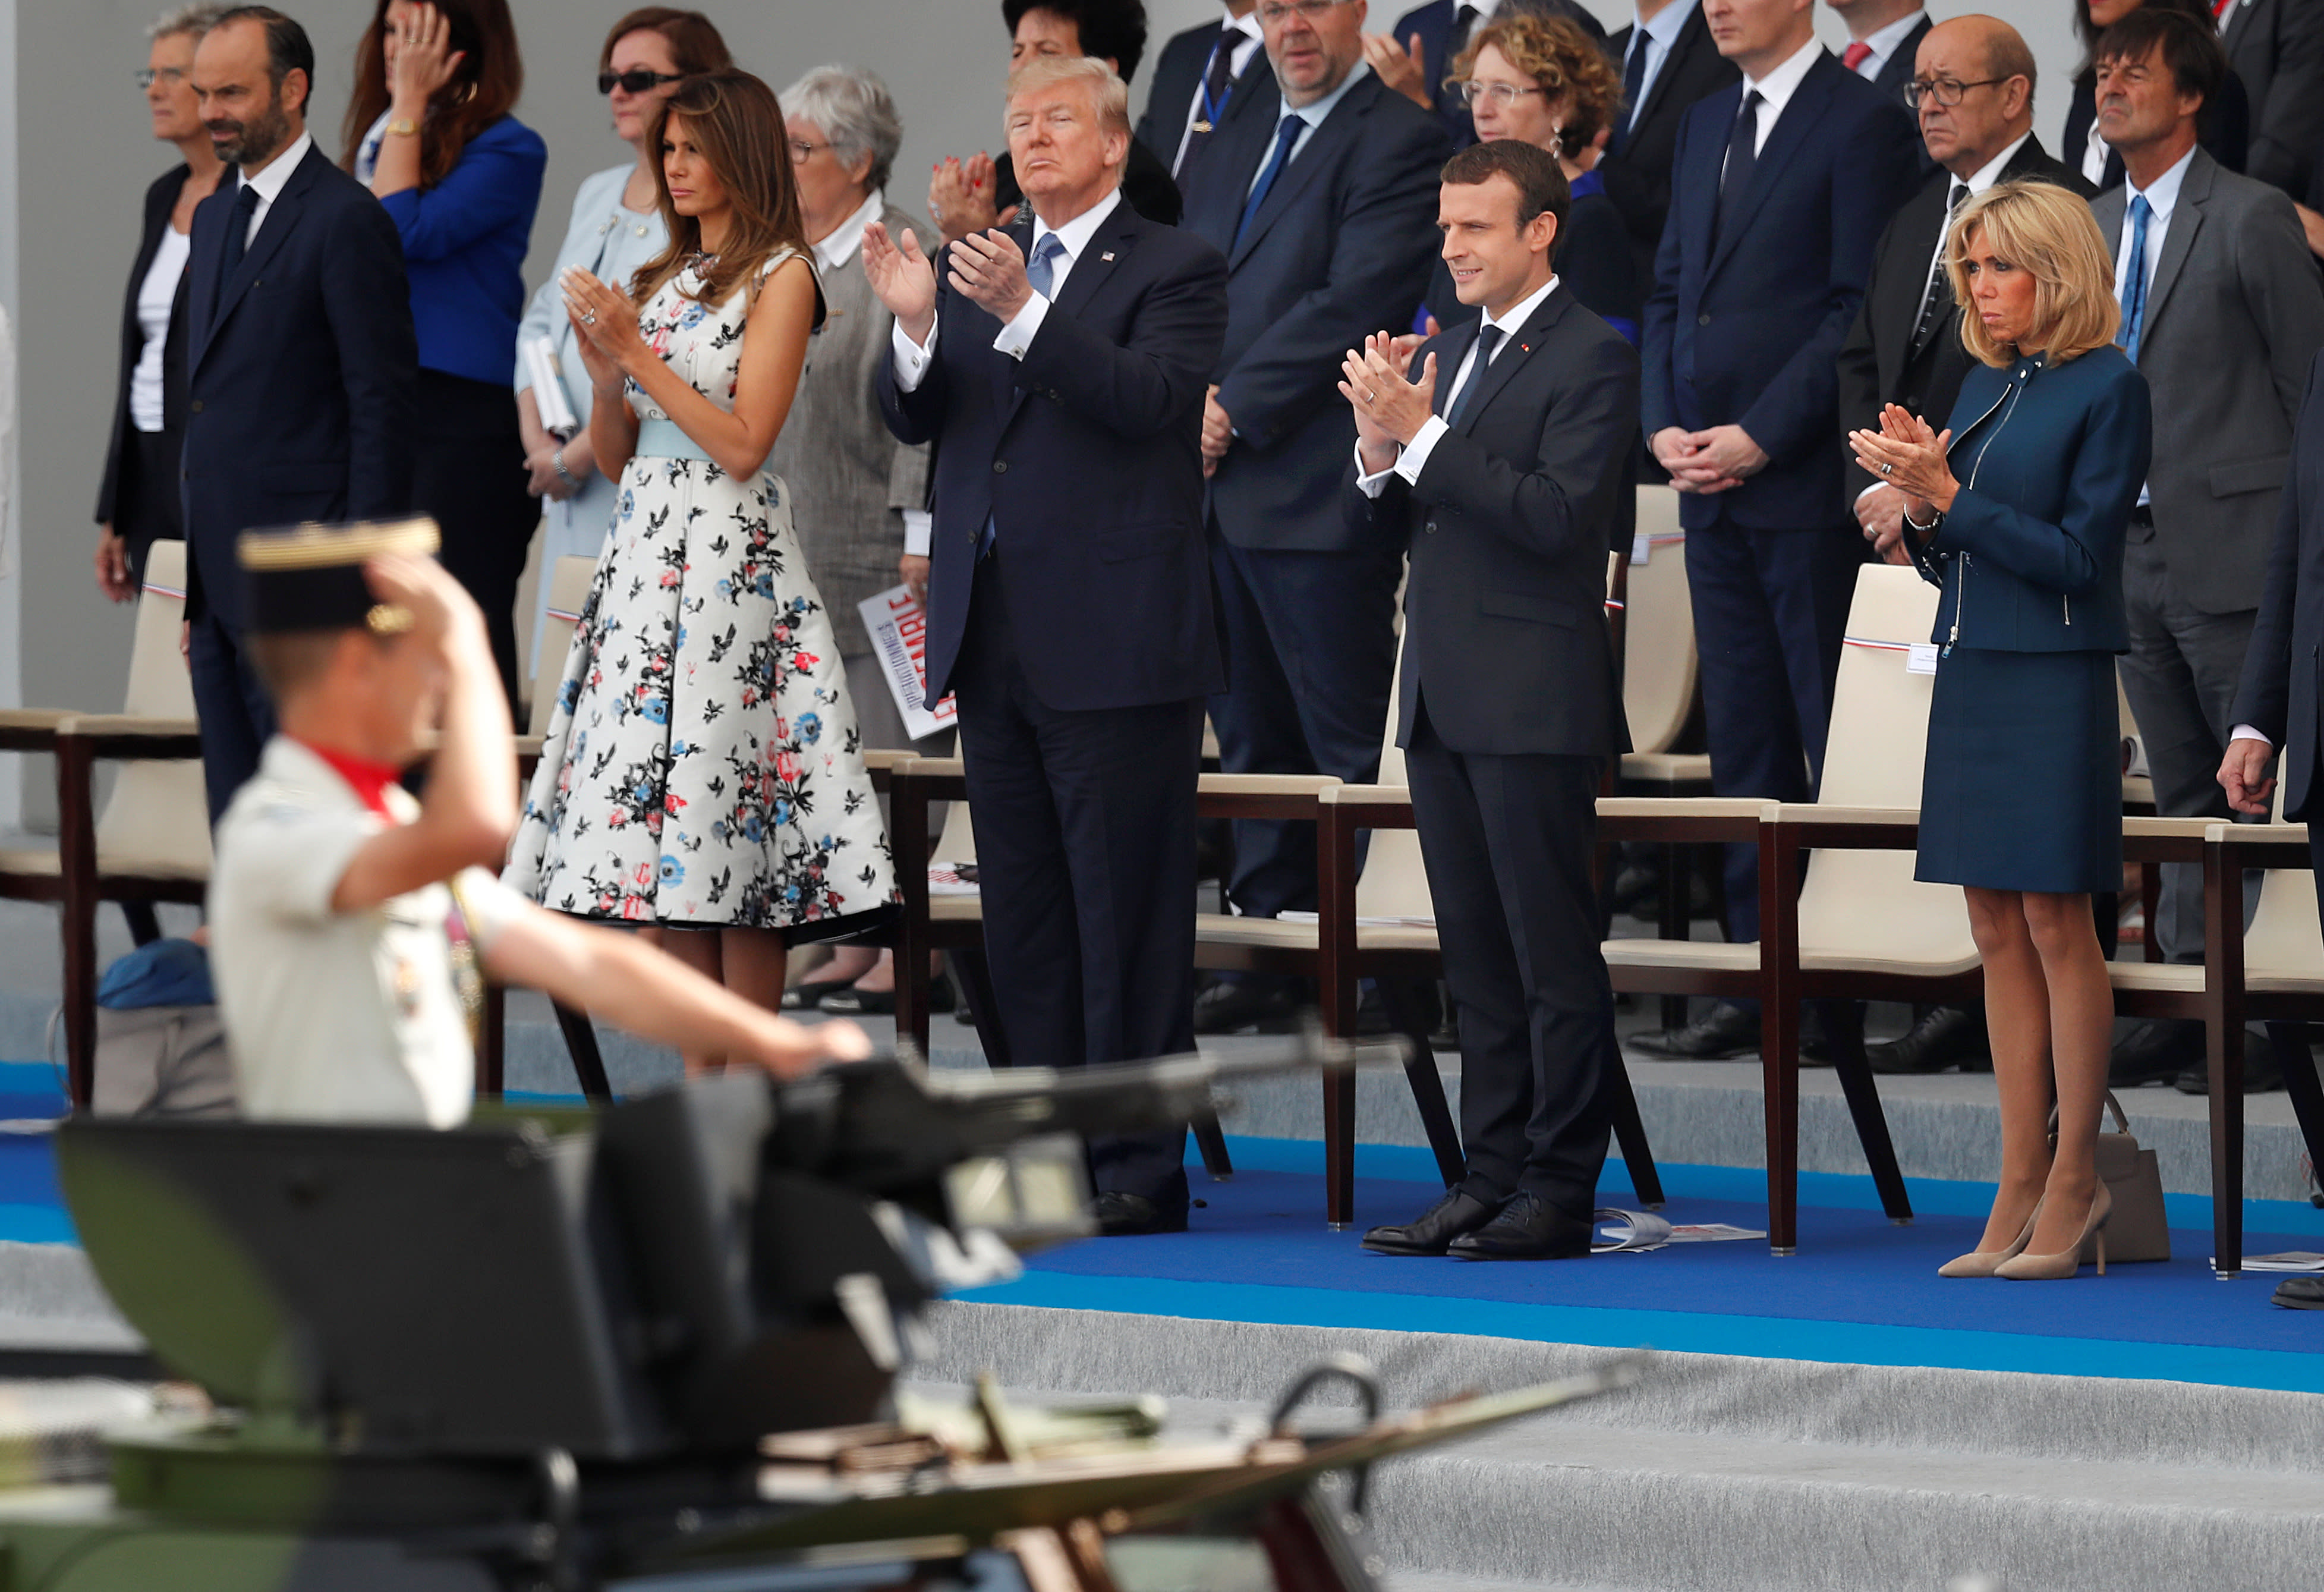 French President Emmanuel Macron, his wife Brigitte Macron, U.S. President Donald Trump and First Lady Melania Trump attend the traditional Bastille Day military parade on the Champs-Elysees in Paris, France, July 14, 2017. (Reuters)